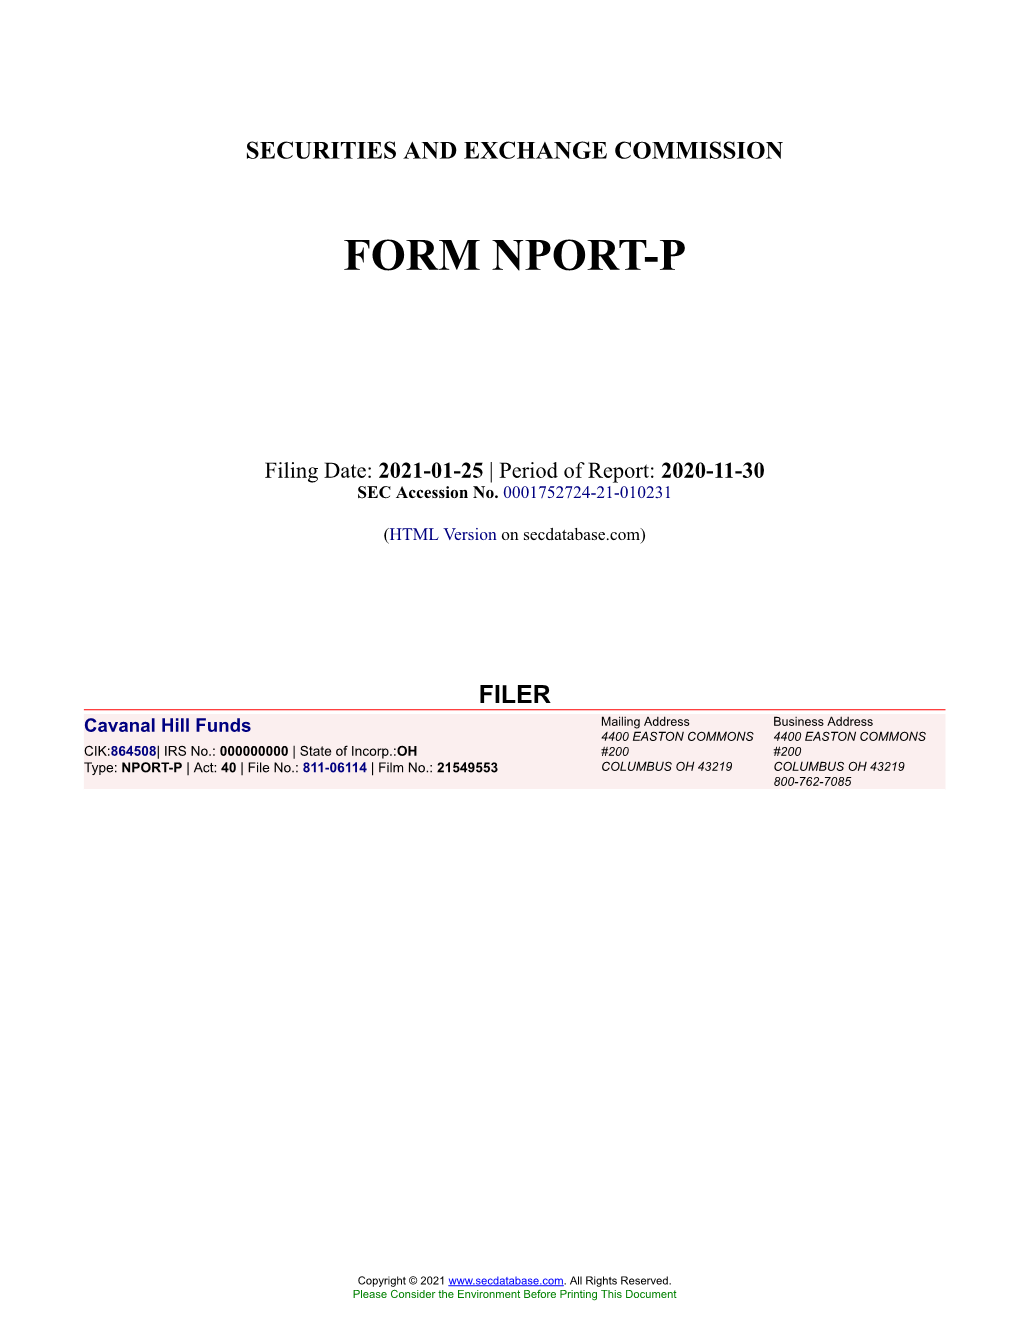 Cavanal Hill Funds Form NPORT-P Filed 2021-01-25